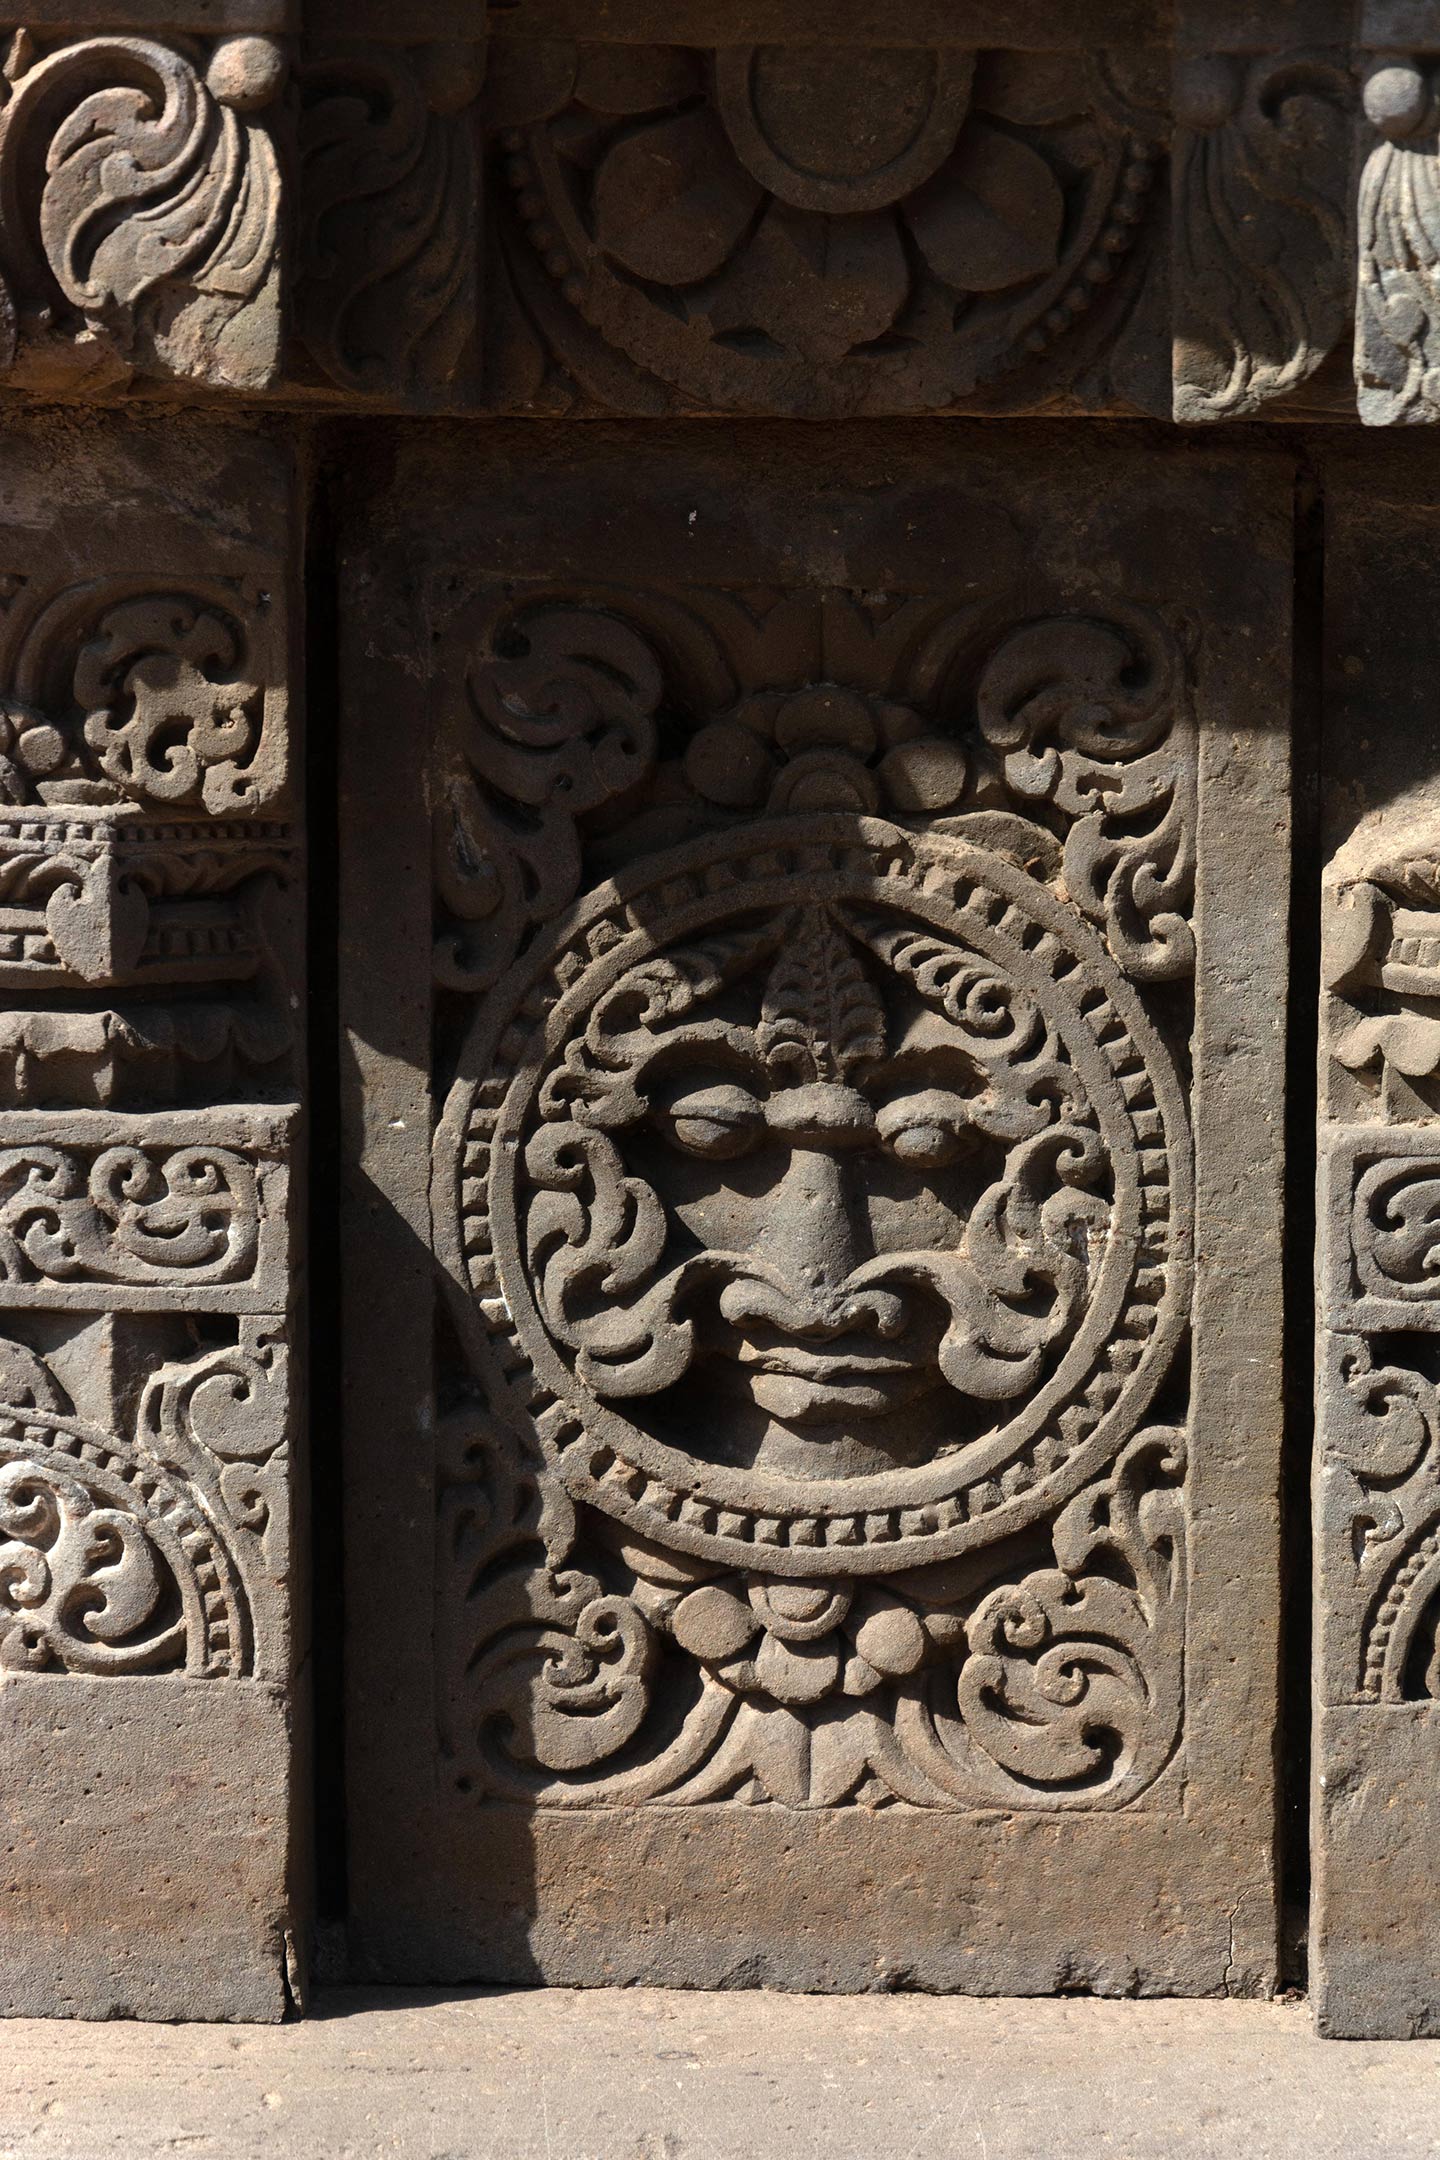 The central artwork of the plaque is in the form of a circular medallion surrounded by a foliage motif. This plaque features a kirtimukha (face of glory) with ardha padma (half lotus) and kalpa lata (creeper) motifs covering the rest of the plaque surface.